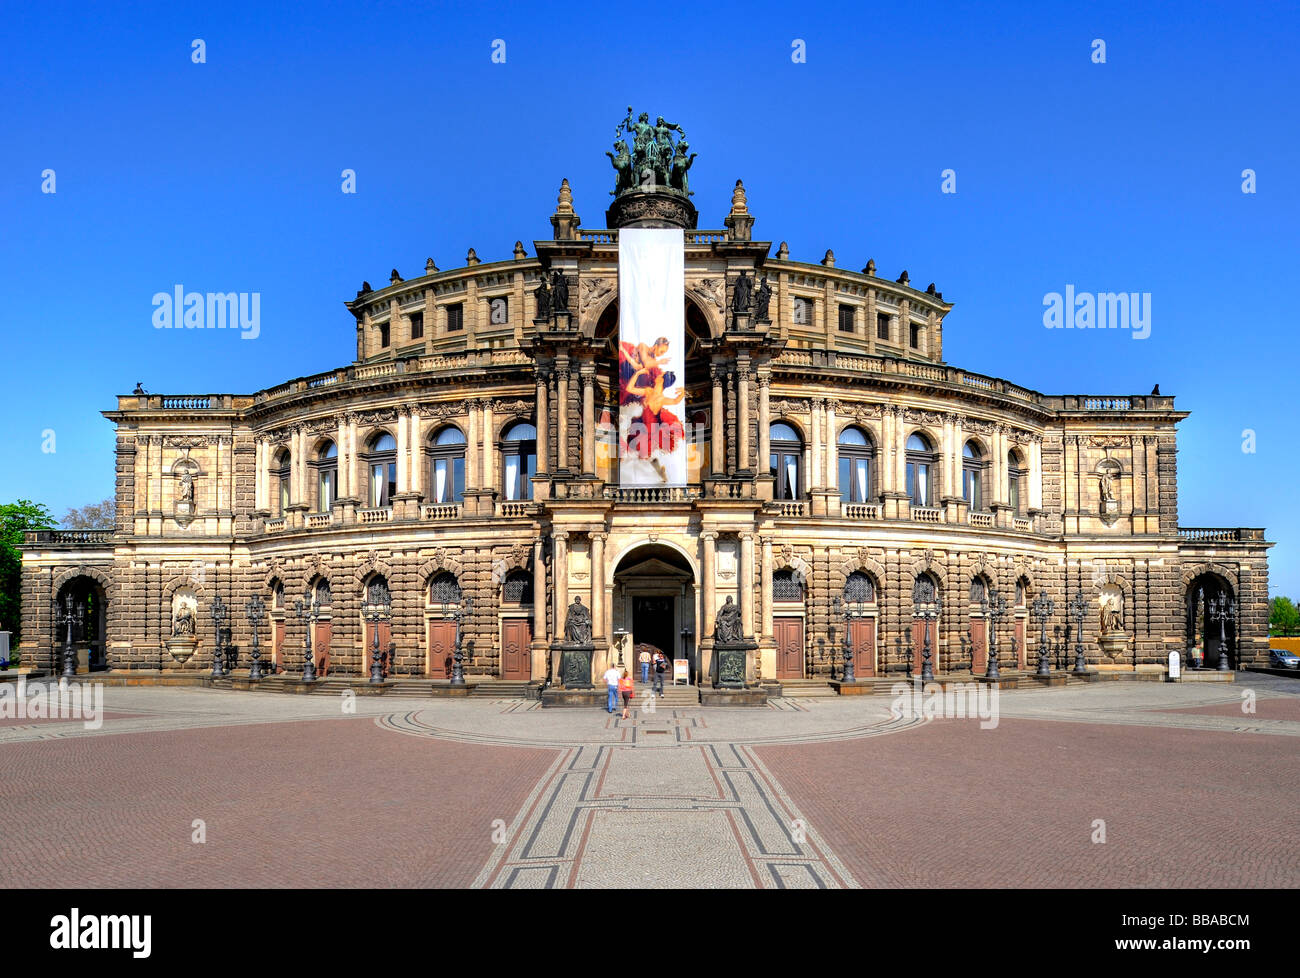 Semperoper Opera house with flags, Theaterplatz square, Dresden, Free State of Saxony, Germany, Europe Stock Photo